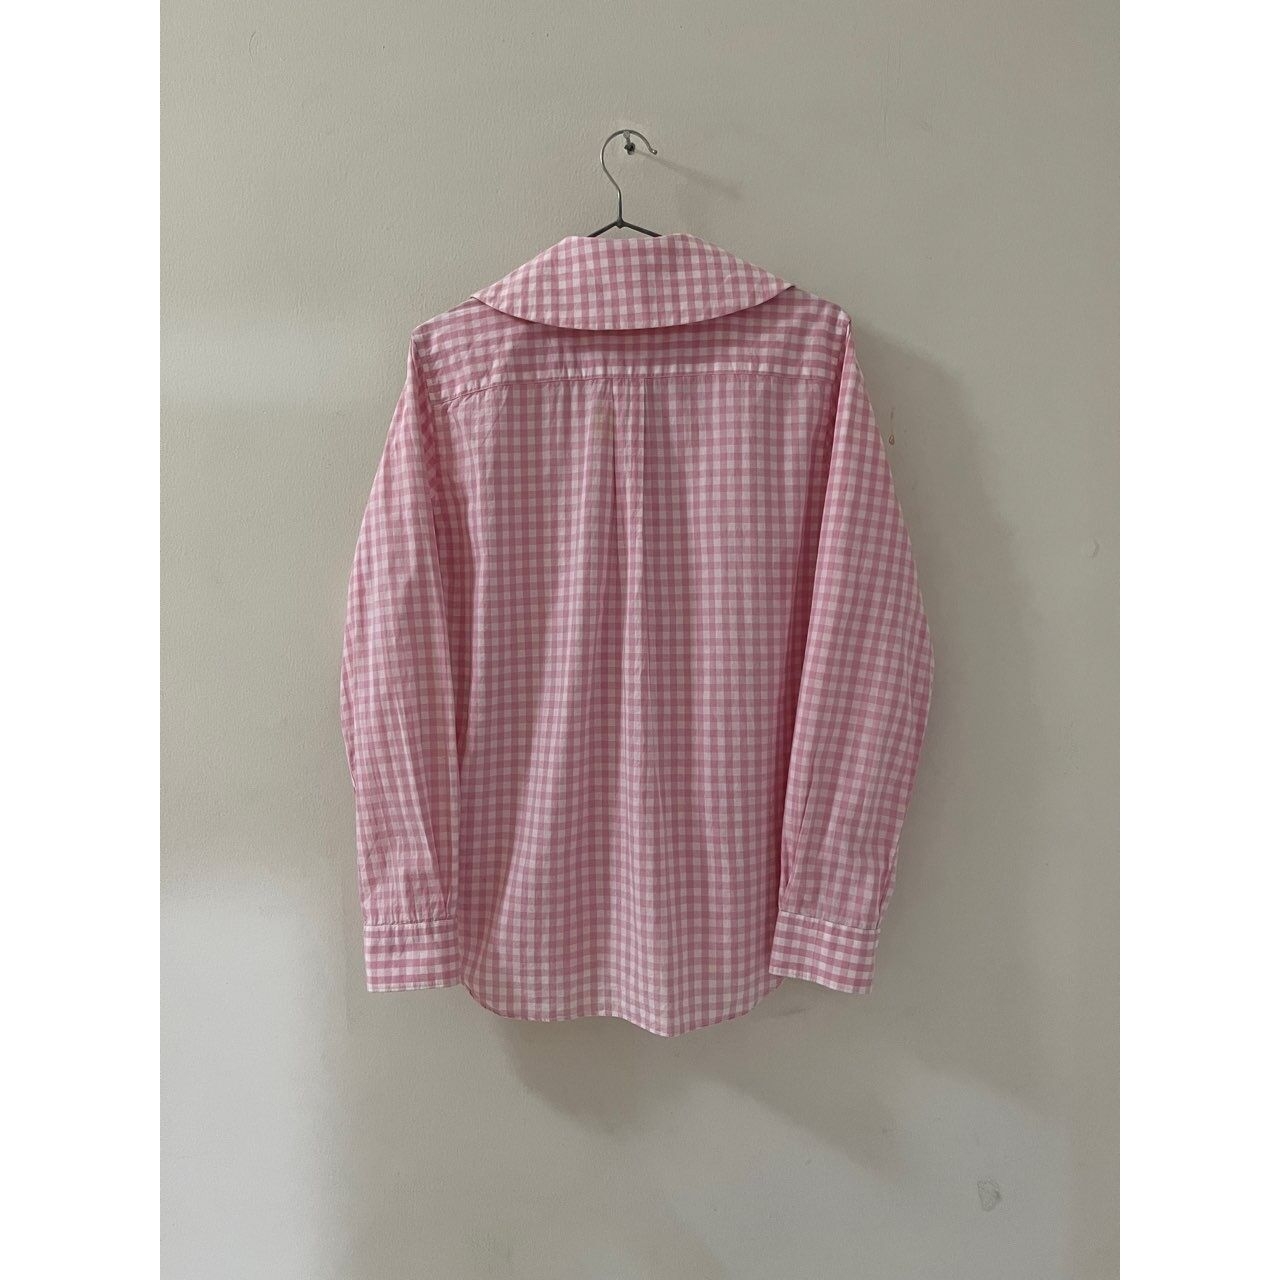 Comme des Garcons Girl big collared shirt